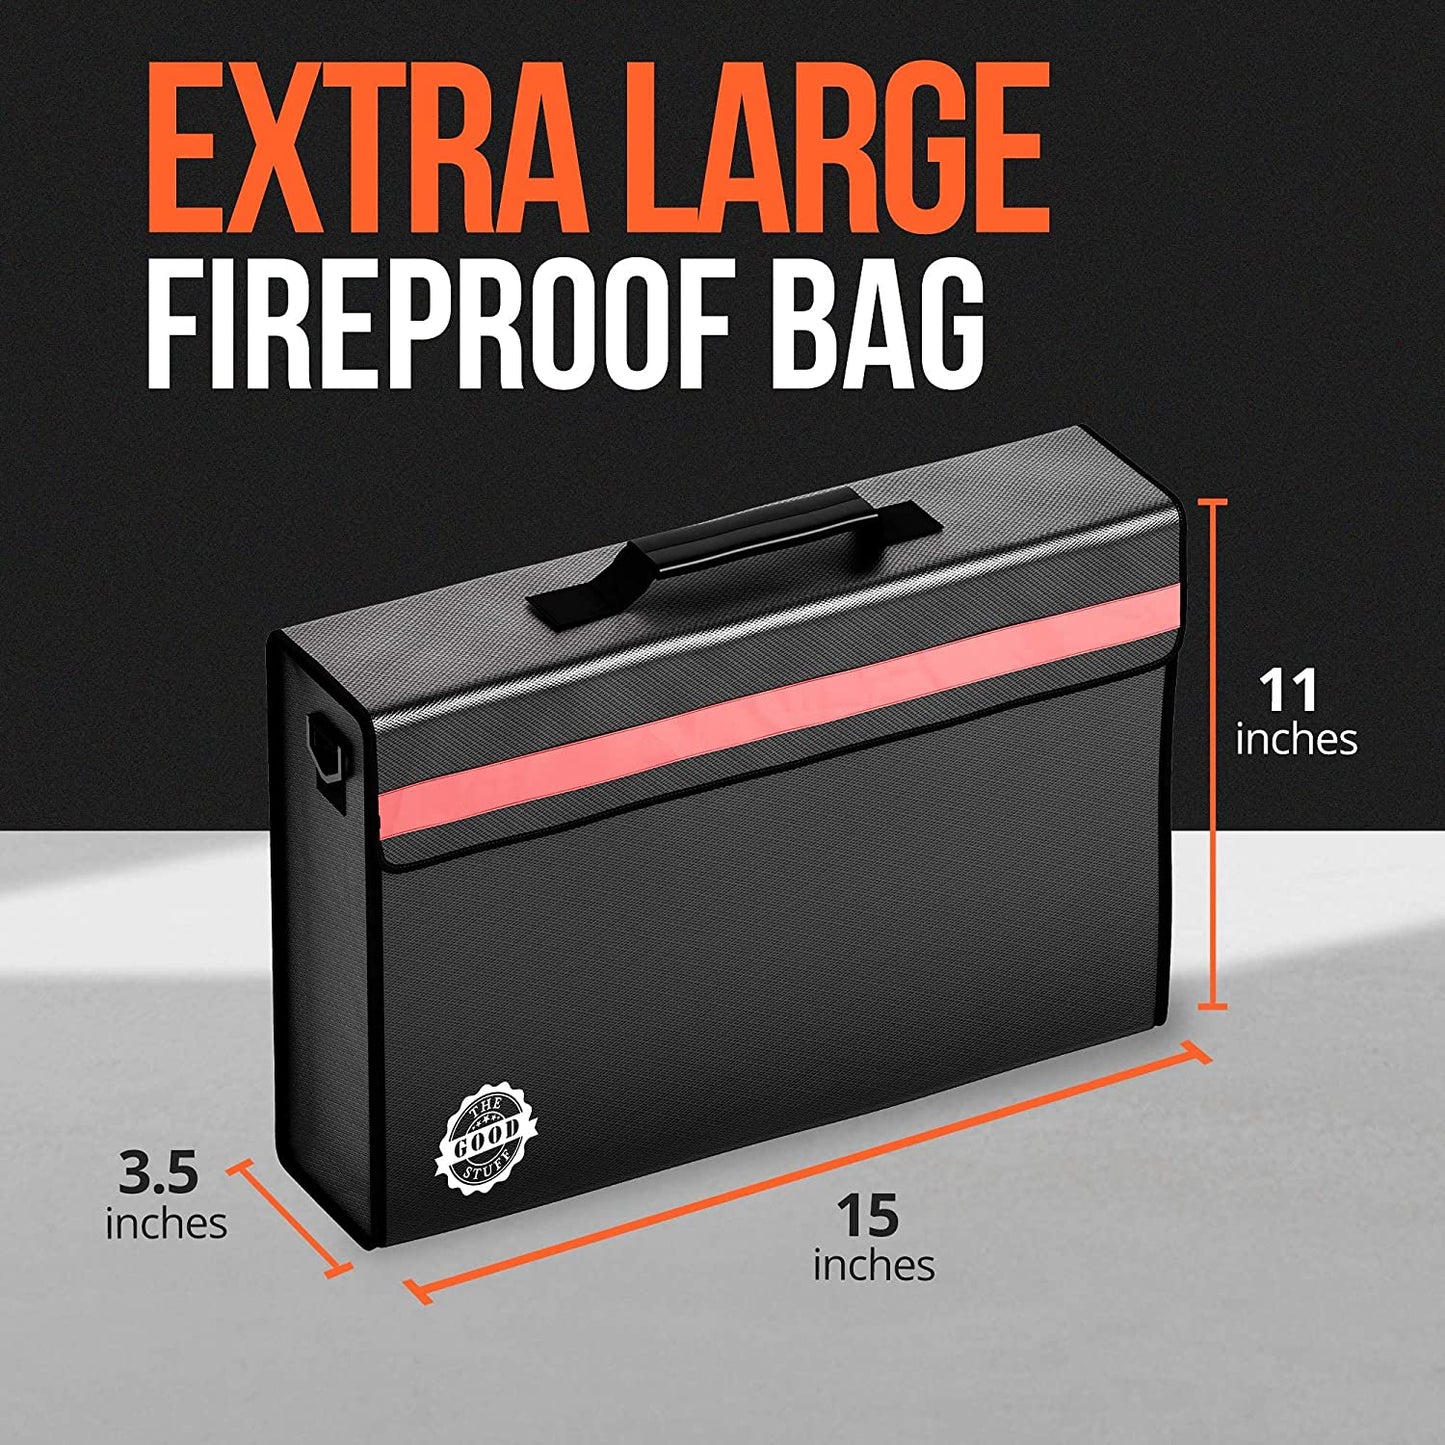 Fireproof Document Bag Legal Size: 11" x 15" Fire Proof Bag with Waterproof Coating to Protect Important Documents from Fire, Bug Out Bags